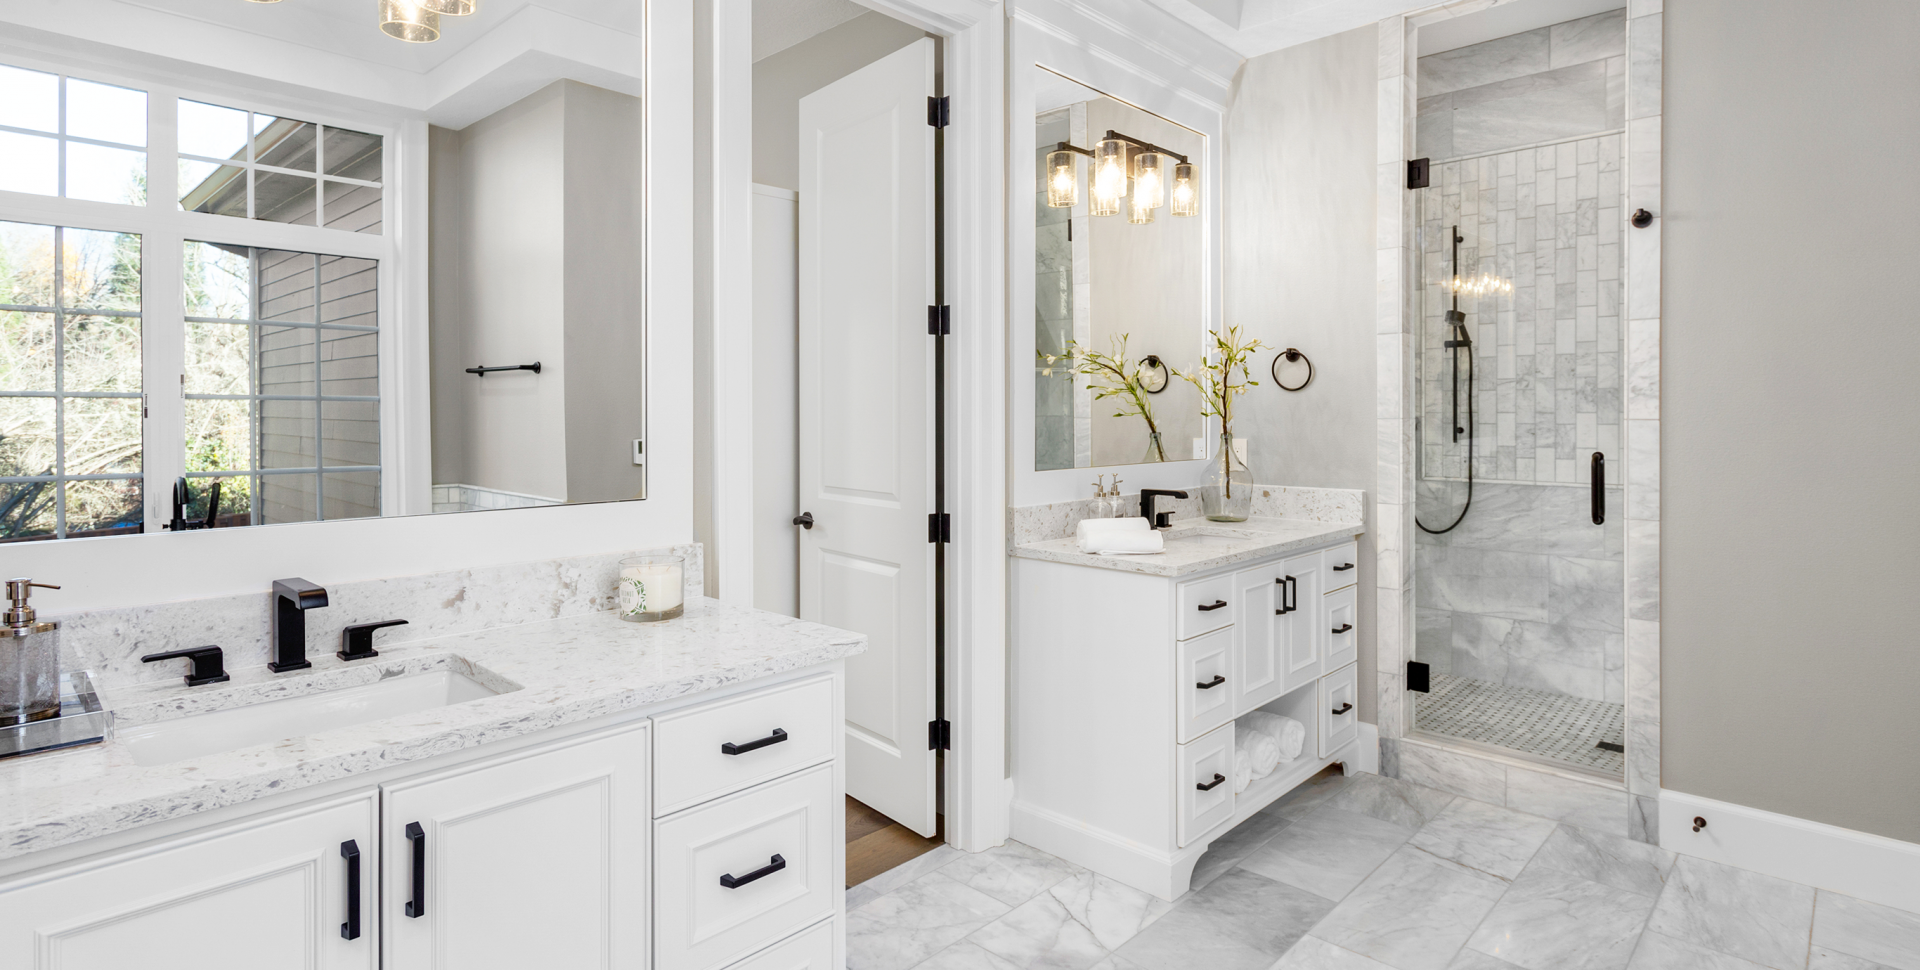 Large bathroom with marble tiles and double sinks